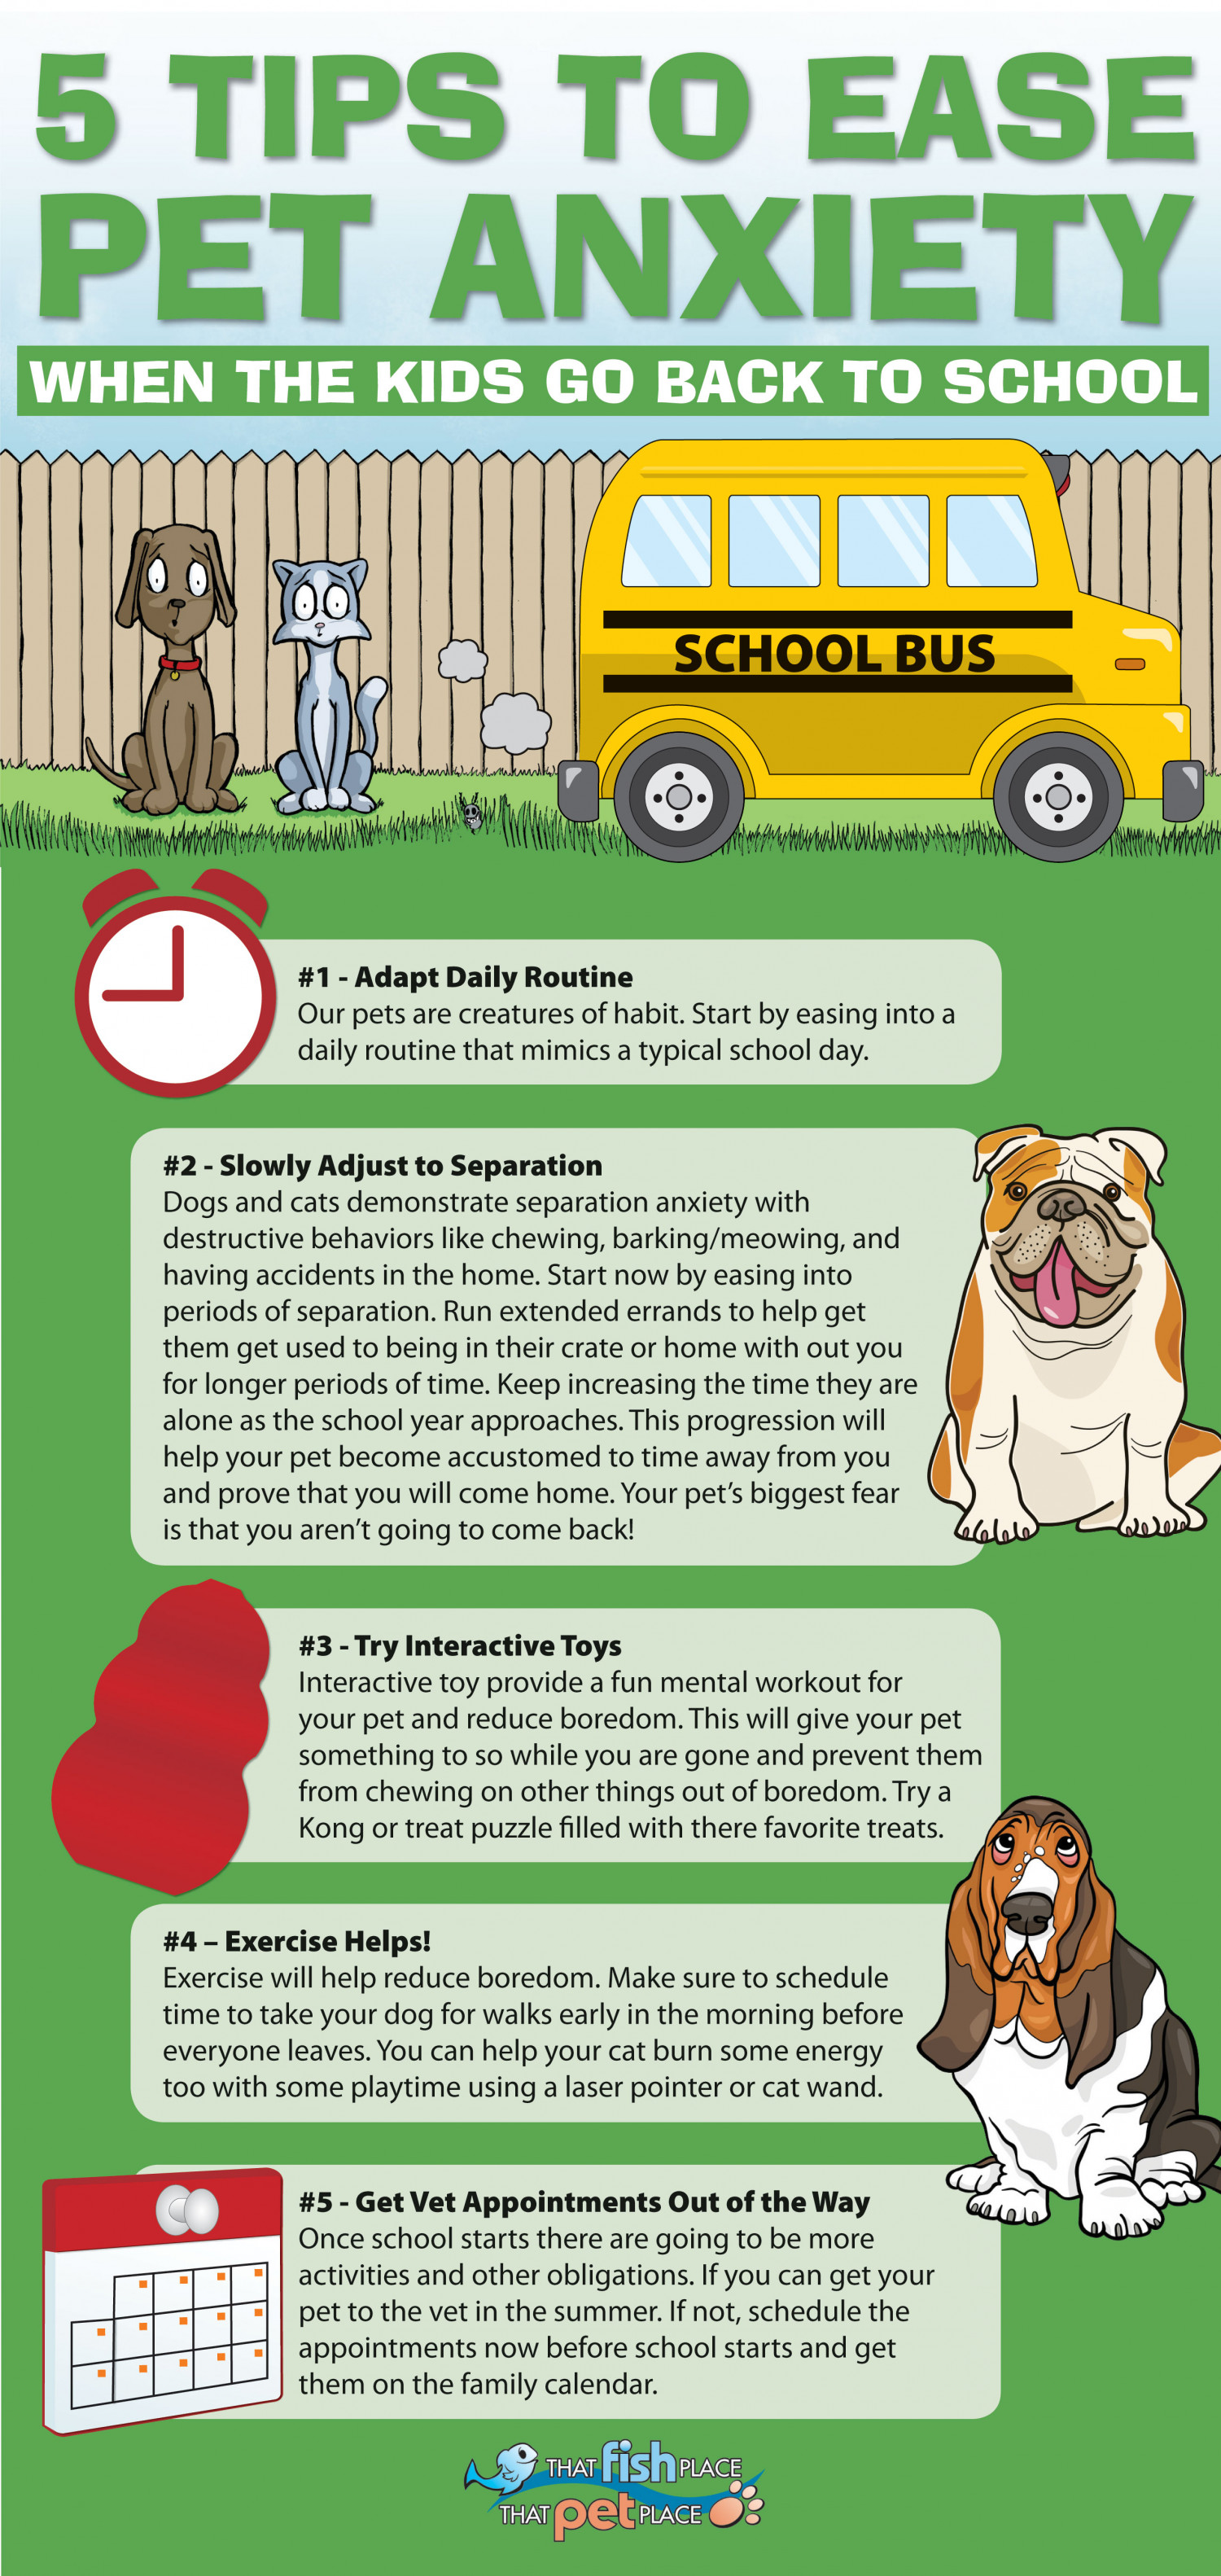 https://i.visual.ly/images/5-tips-to-ease-pet-anxiety-when-the-kids-go-back-to-school_55c89b9b4d42a_w1500.jpg